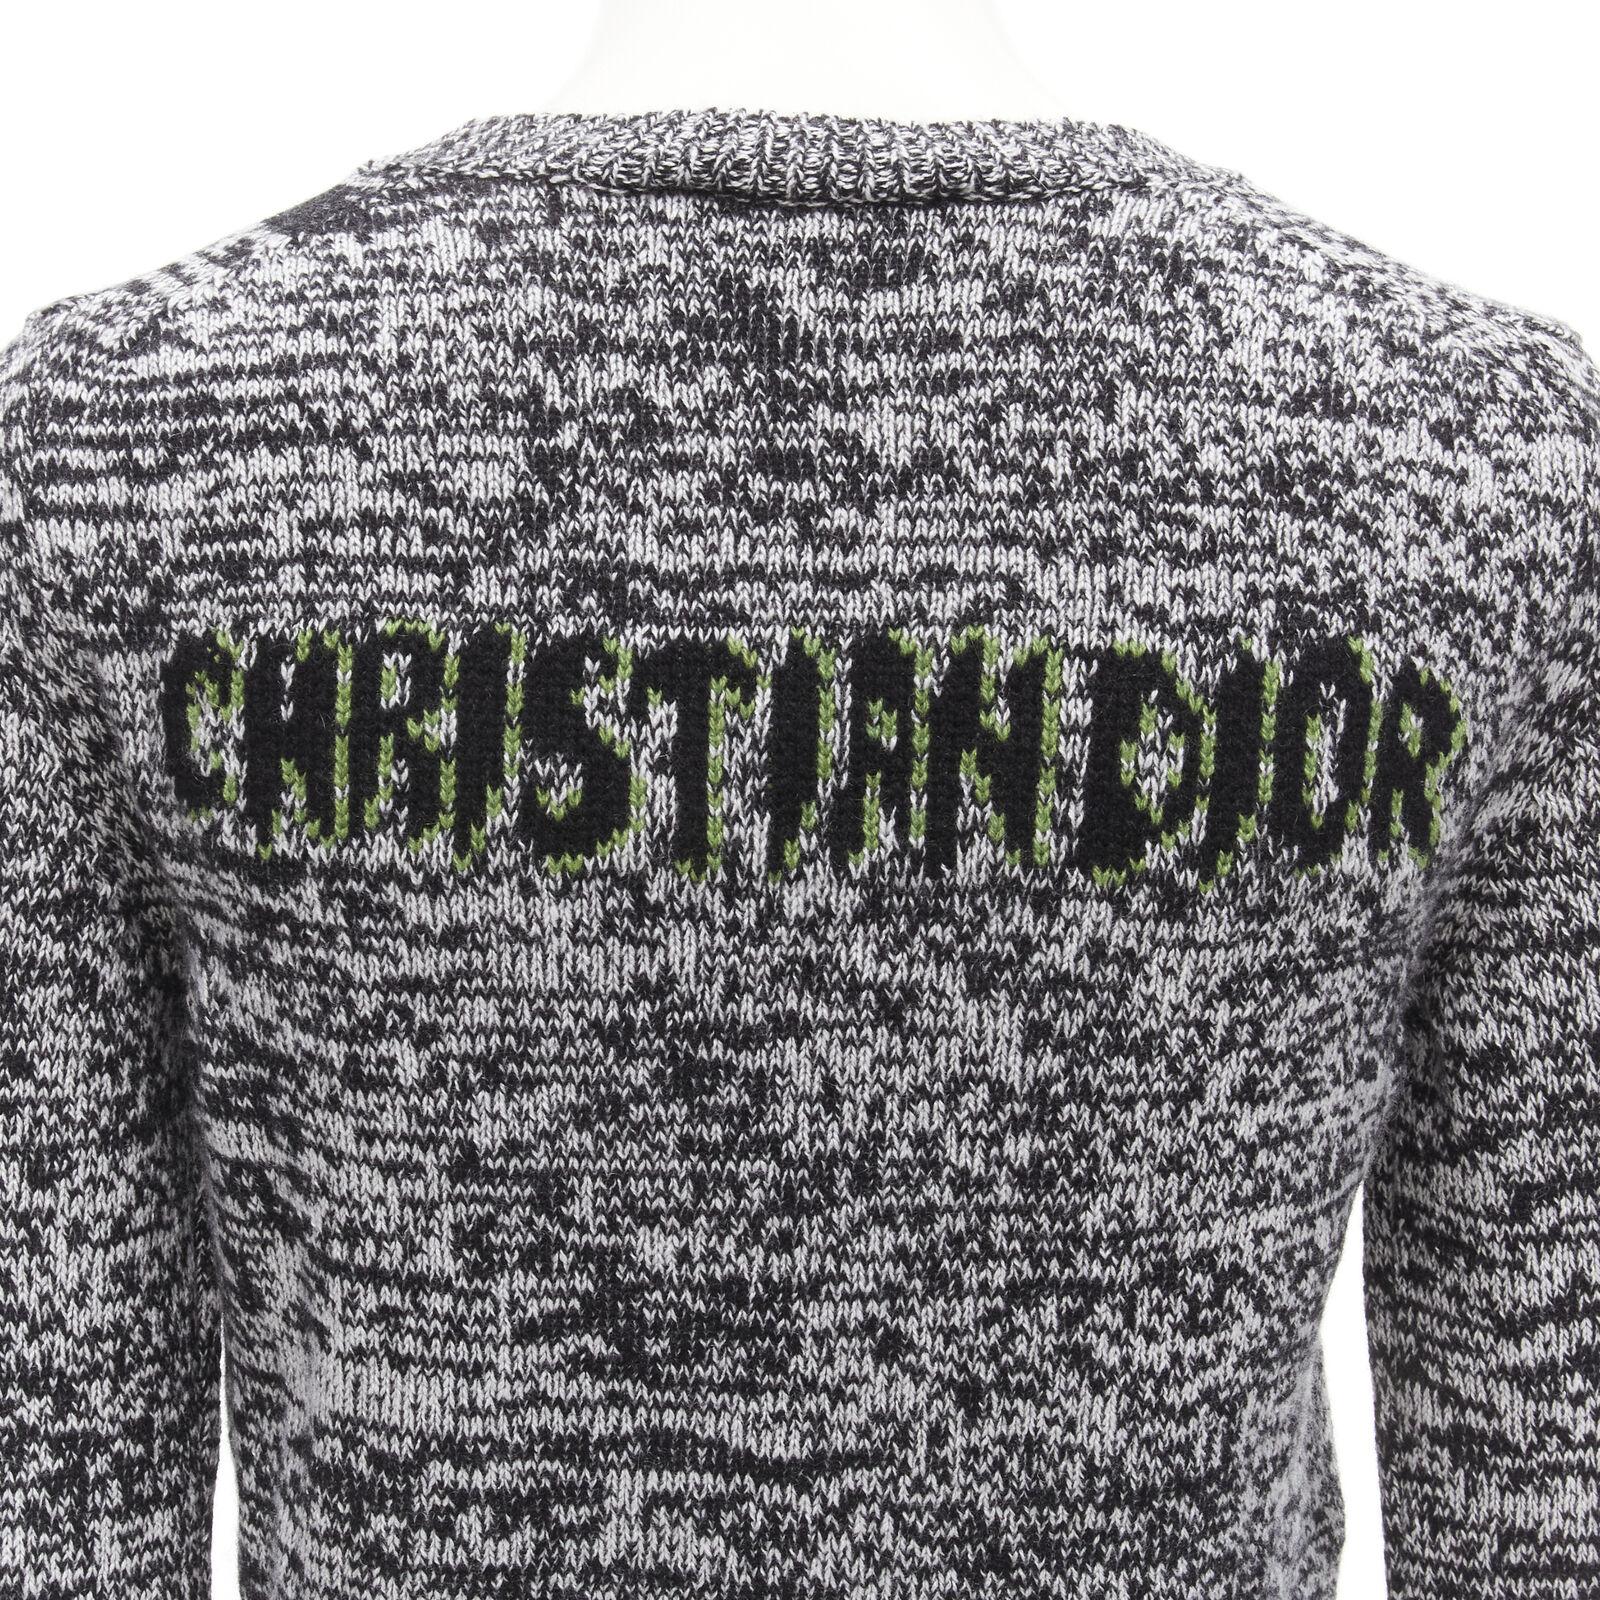 CHRISTIAN DIOR 100% cashmere melange grey dragon illustration sweater FR34 XS
Reference: AAWC/A00236
Brand: Christian Dior
Designer: Maria Grazia Chiuri
Collection: 2021
Material: 100% Cashmere
Color: Grey, Green
Pattern: Graphic
Extra Details: